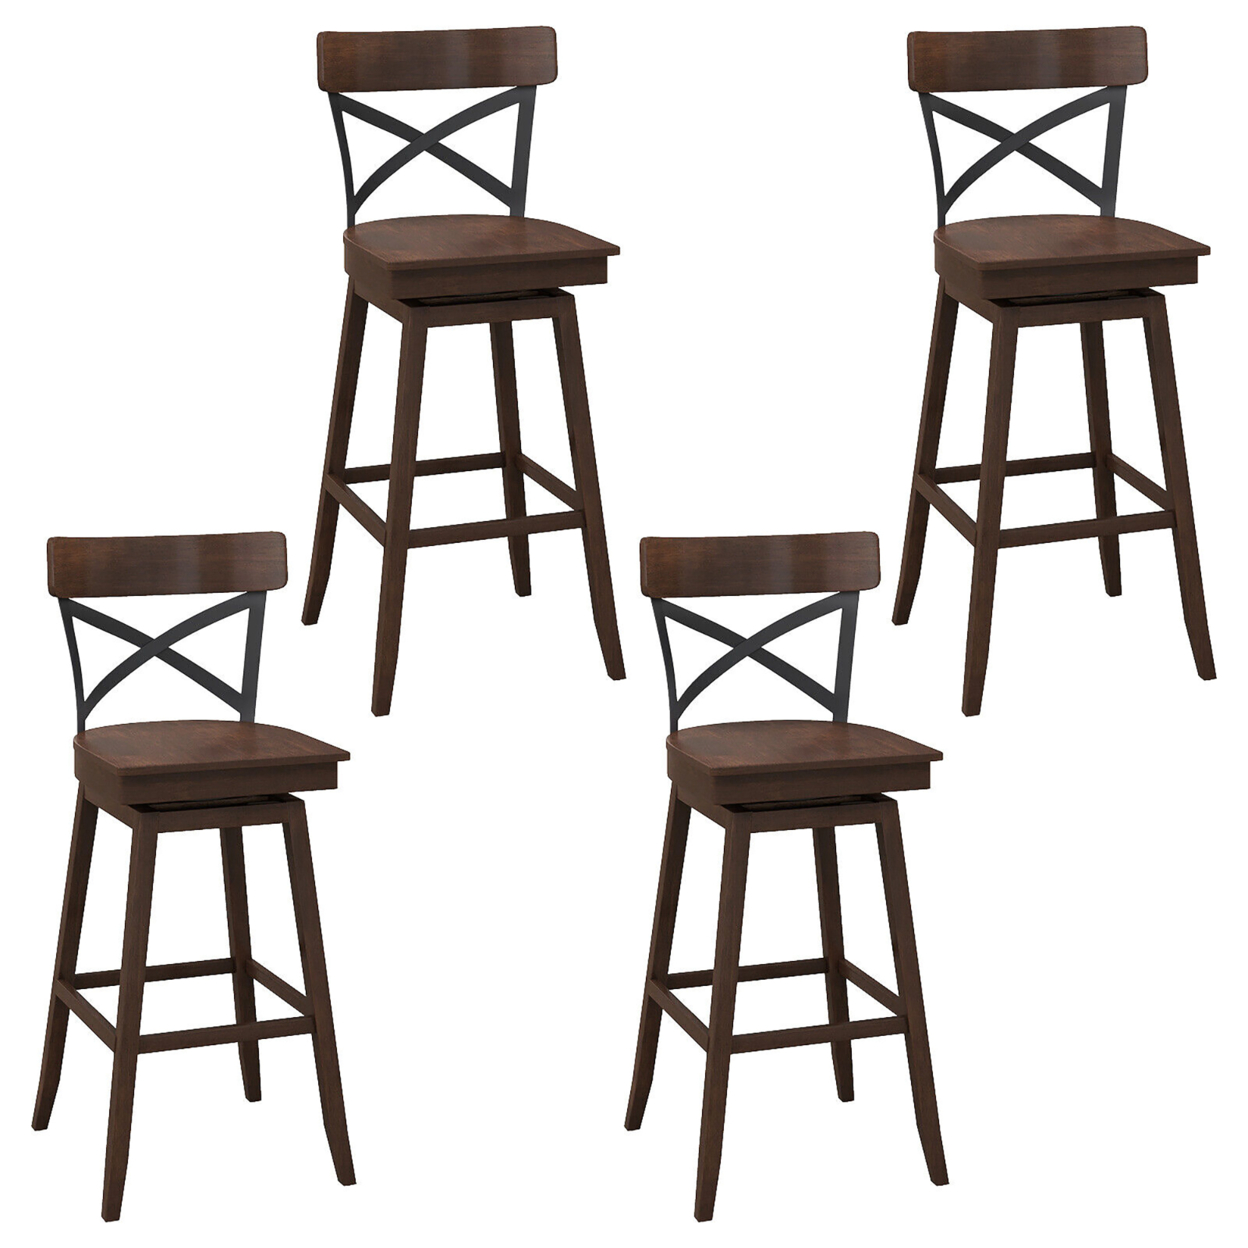 Set Of 4 Wooden Swivel Bar Stools Bar Height Kitchen Chairs W/ Back Brown